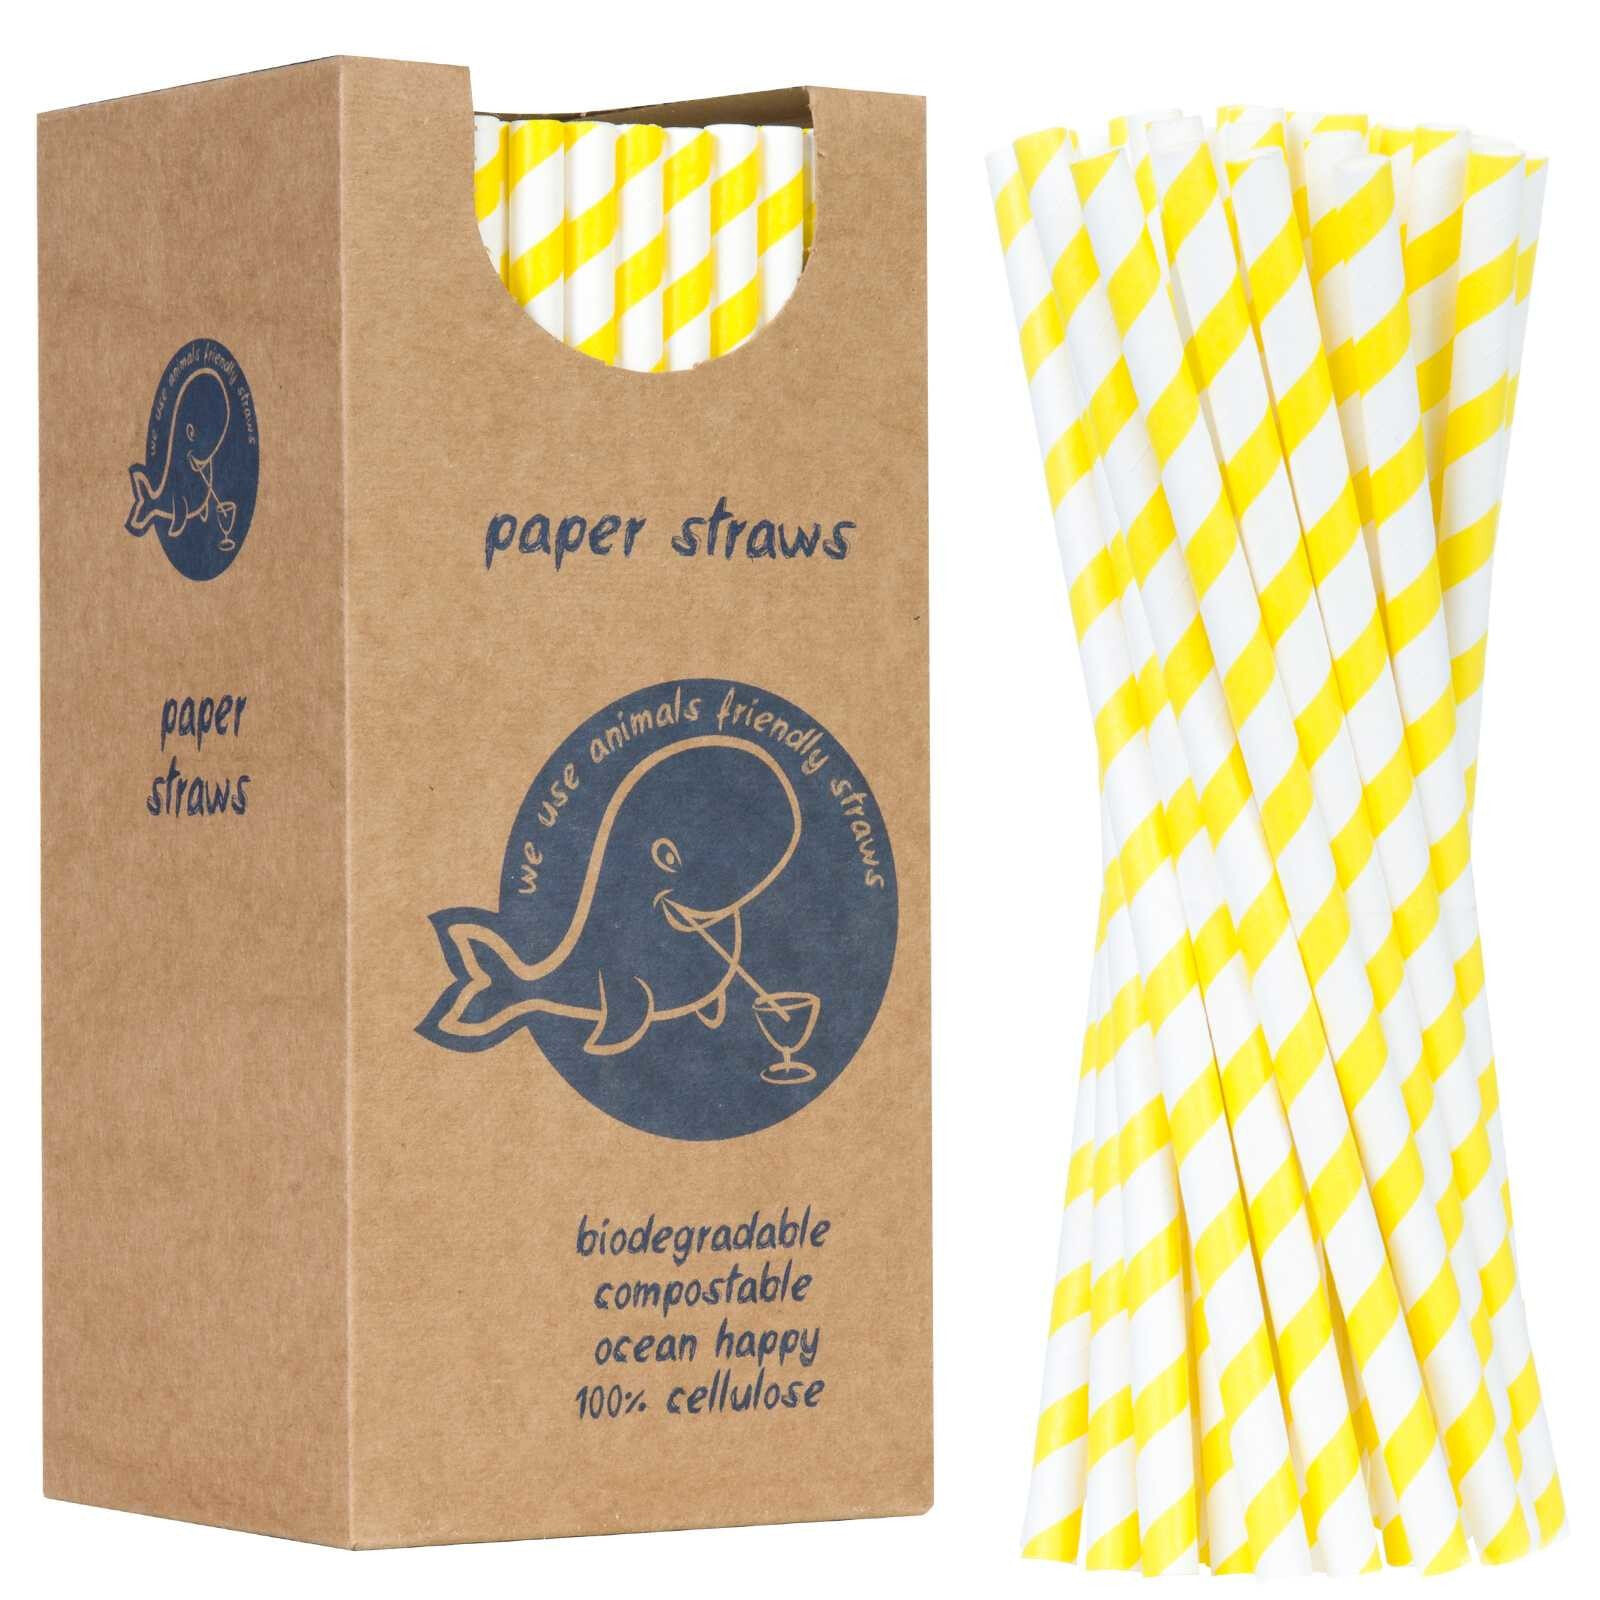 Paper straws BIO ecological PAPER STRAWS thick 8 / 205mm - white and yellow 160 pcs.